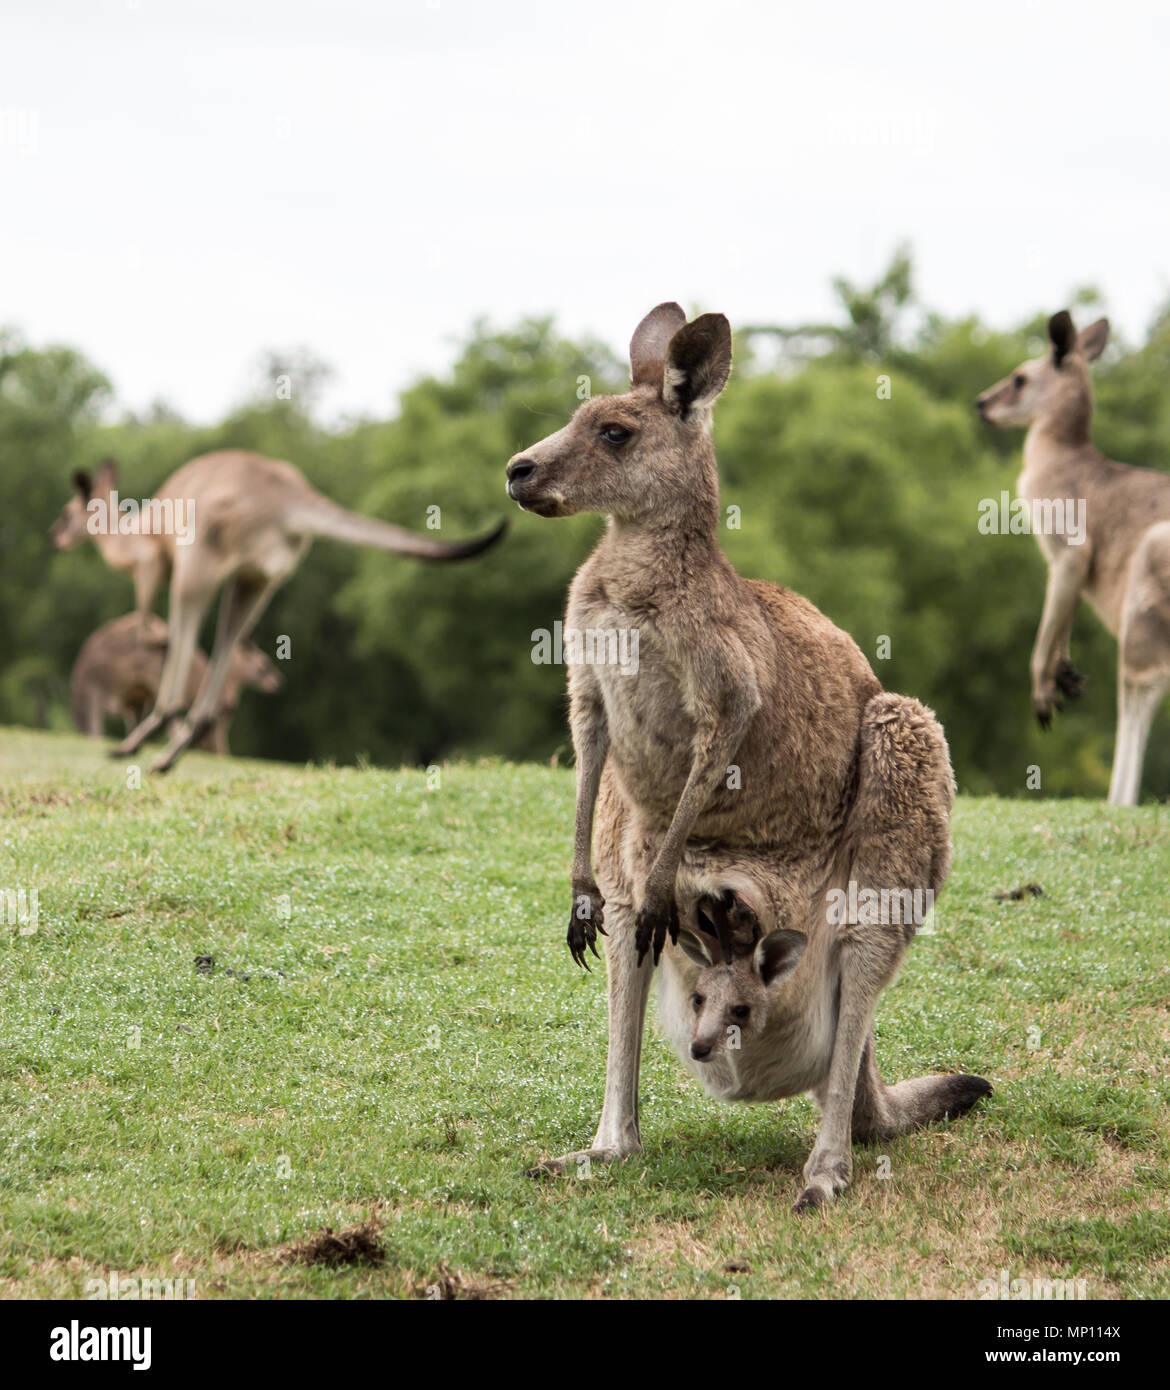 Australian native Kangaroo mother with baby joey in pouch standing in field Stock Photo